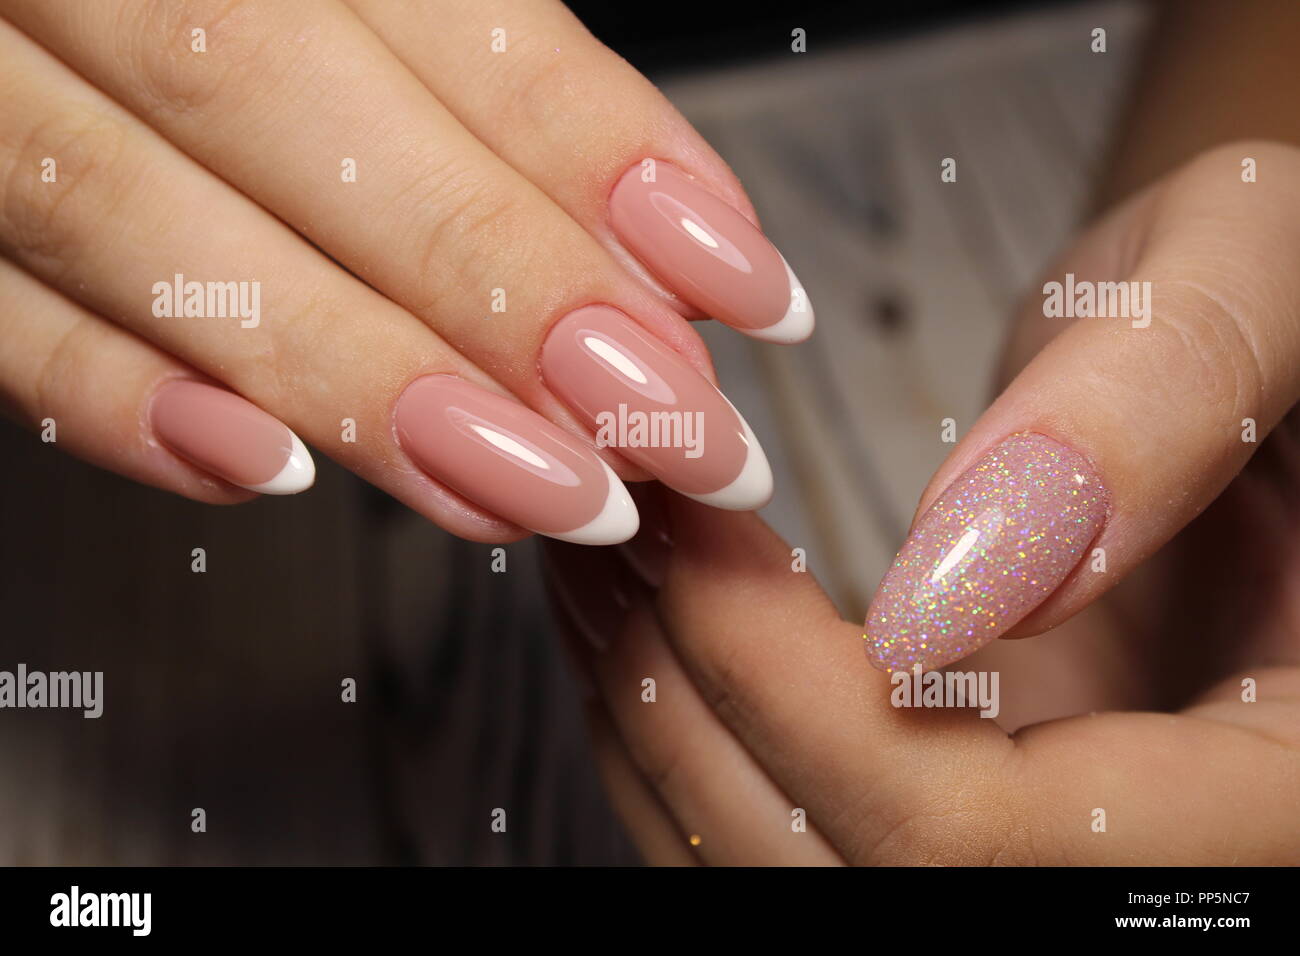 3. "The Best Nail Art Designs for Perfectly Manicured Nails" - wide 6